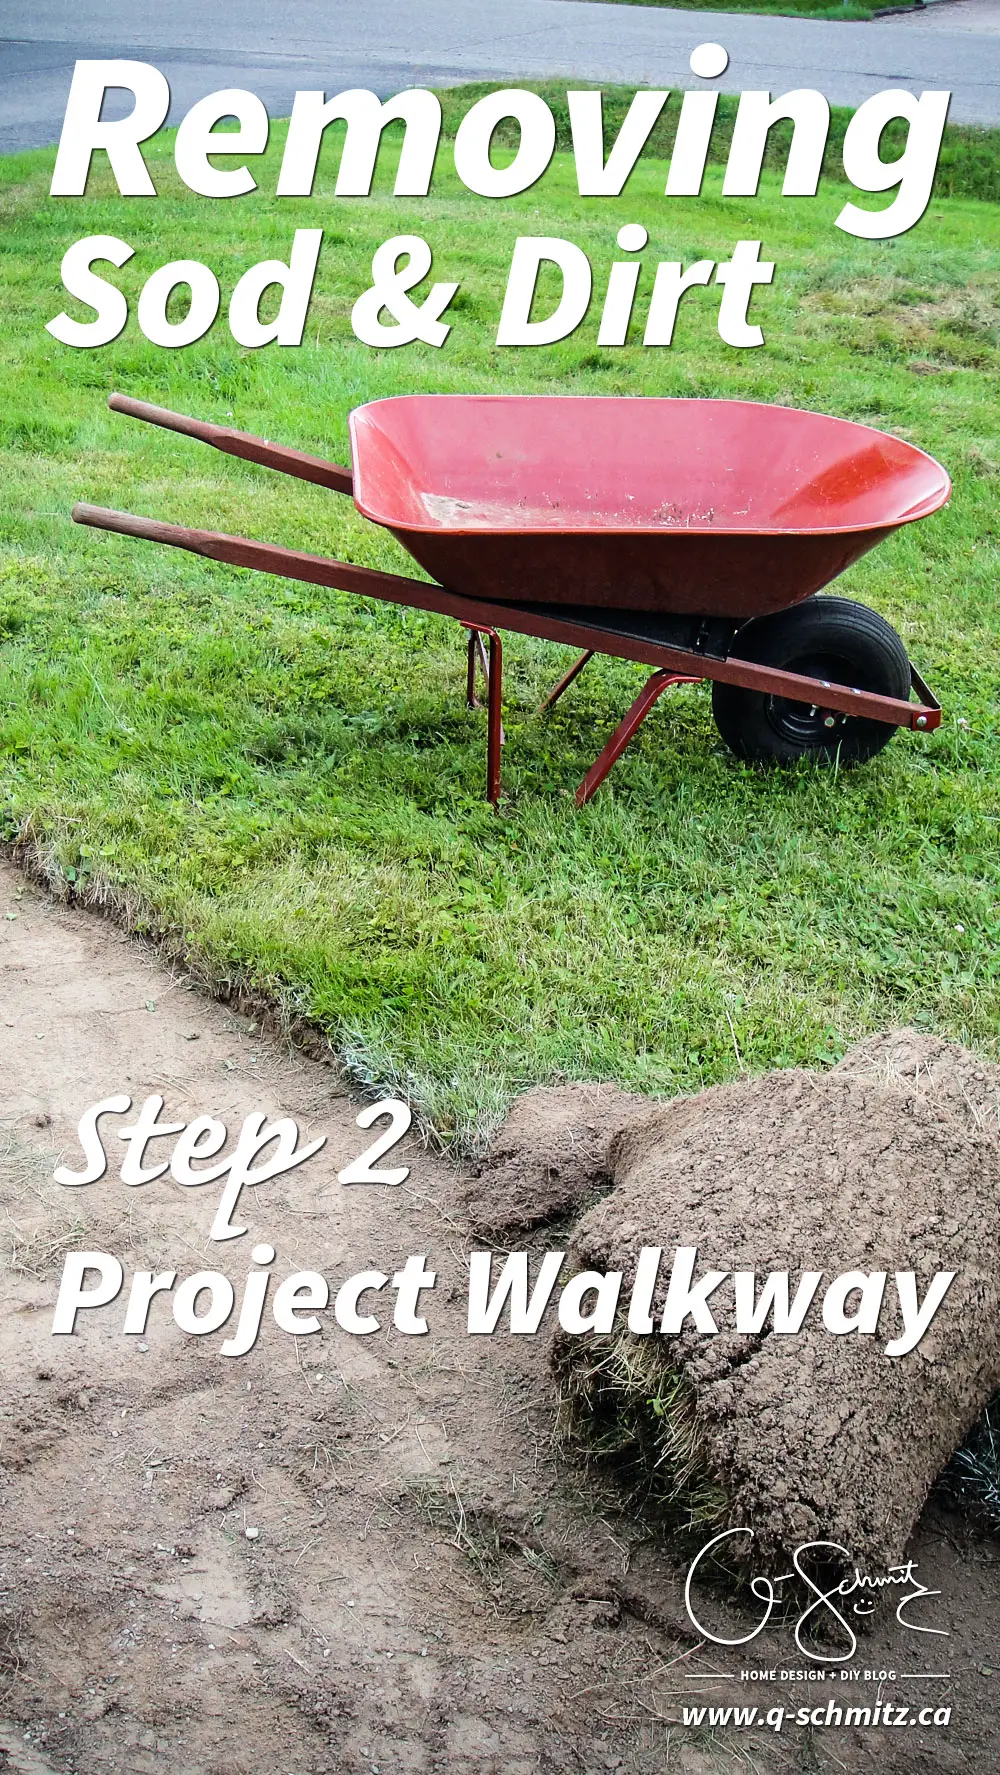 The second step for our DIY Project Walkway this summer – removing turf / sod and grass to make room for landscaping! 